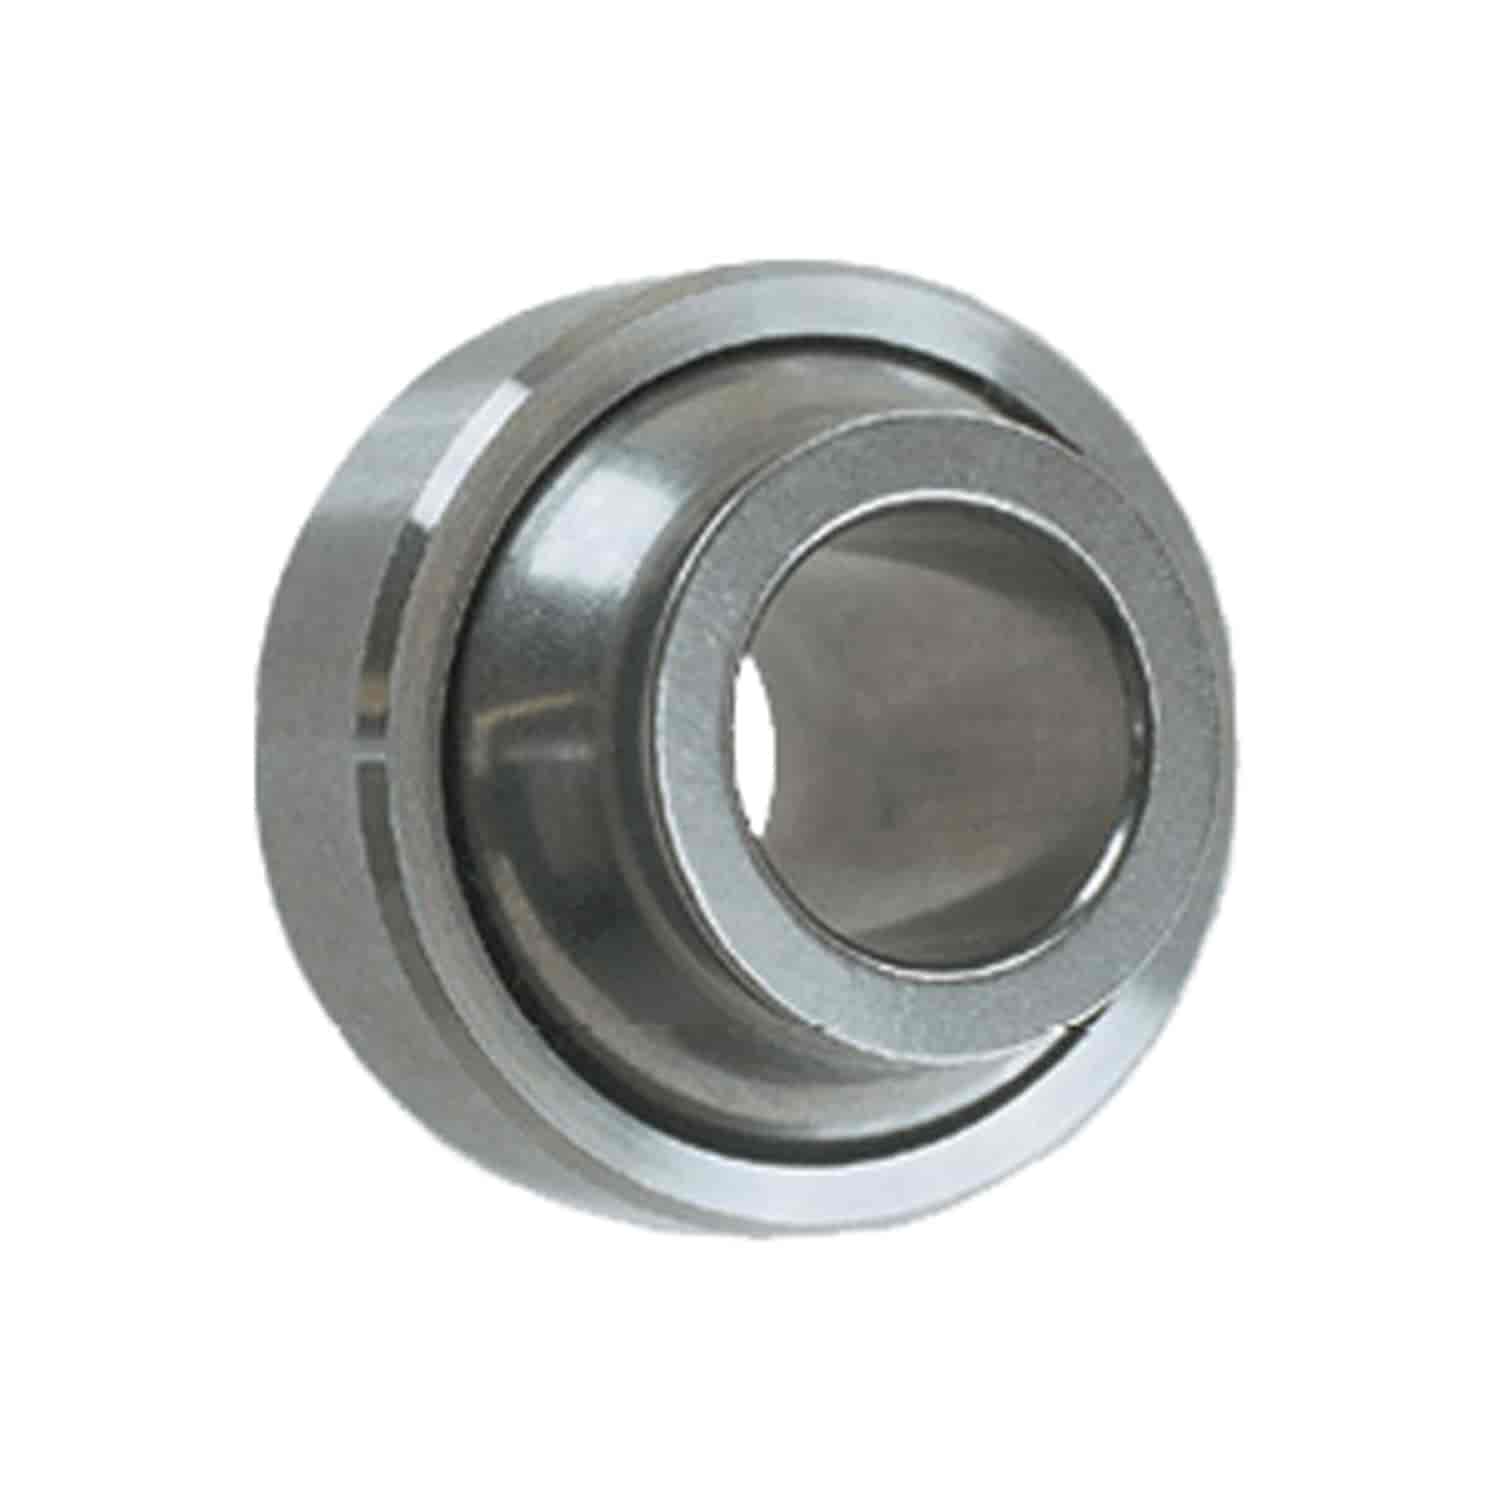 High Misalignment 440C SS Shperical Bearing Hole Size: 0.75"